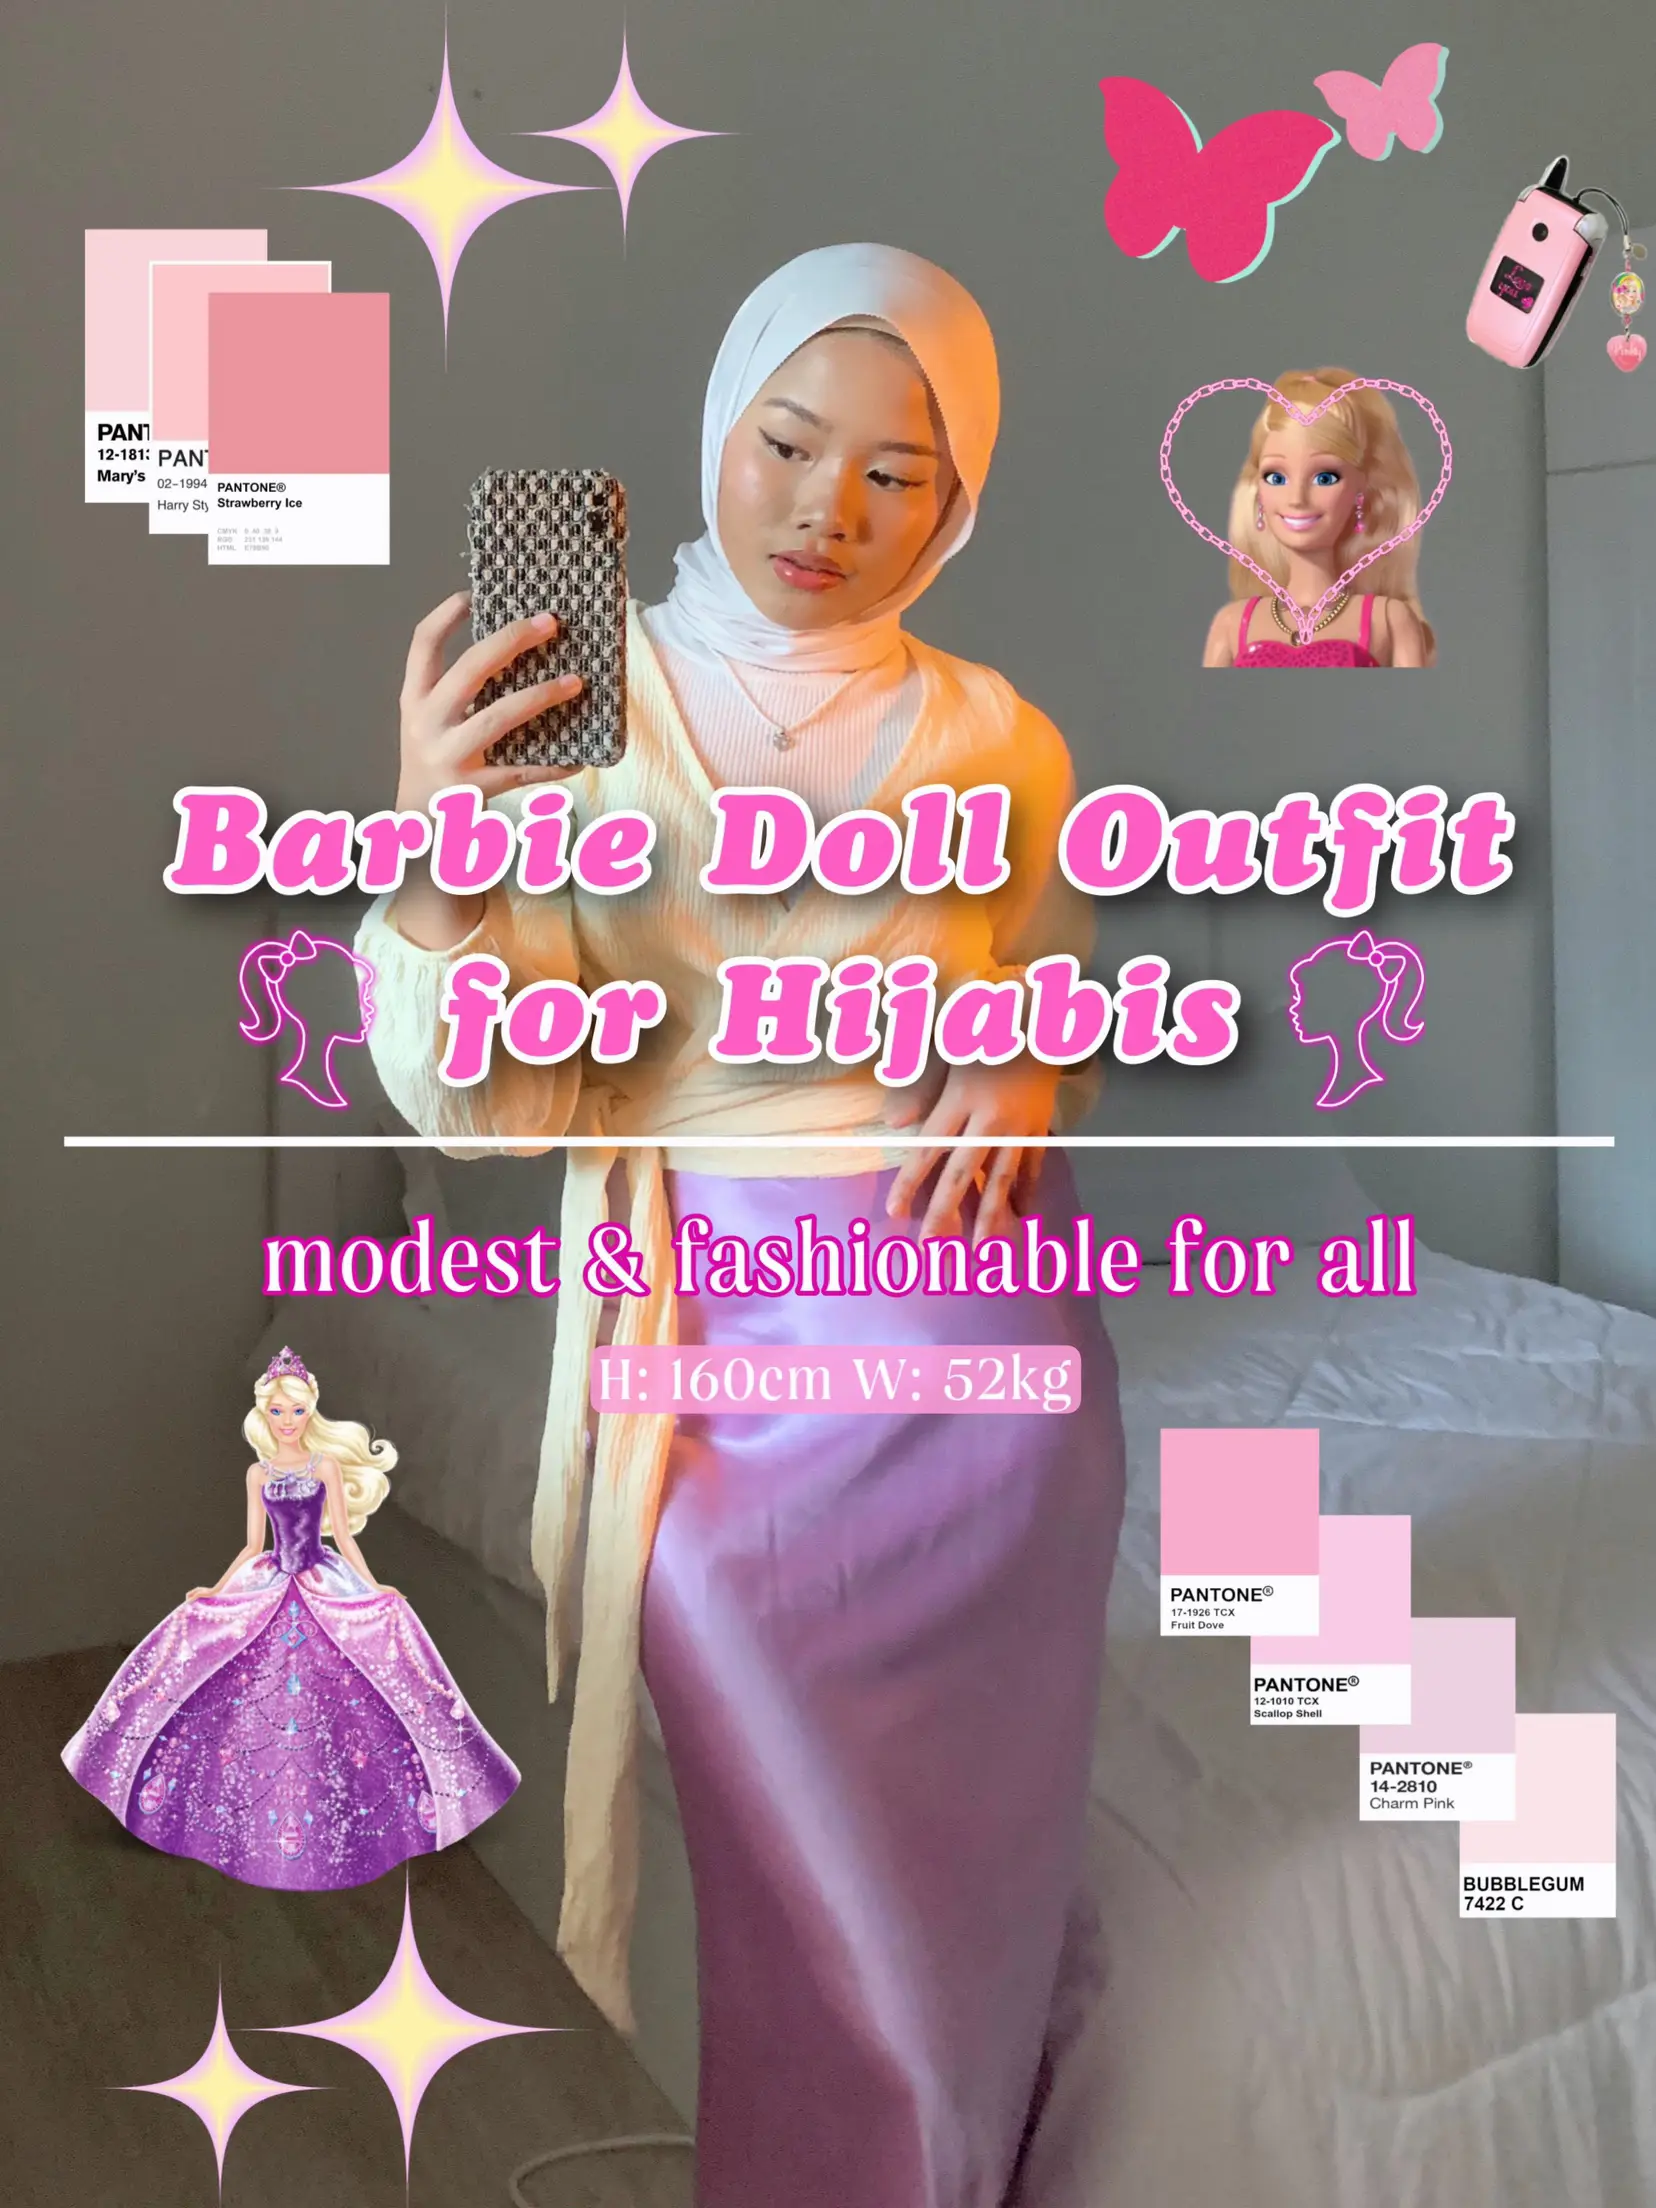 Barbie  Haul: Doll Clothes, Accessories & More! #4 